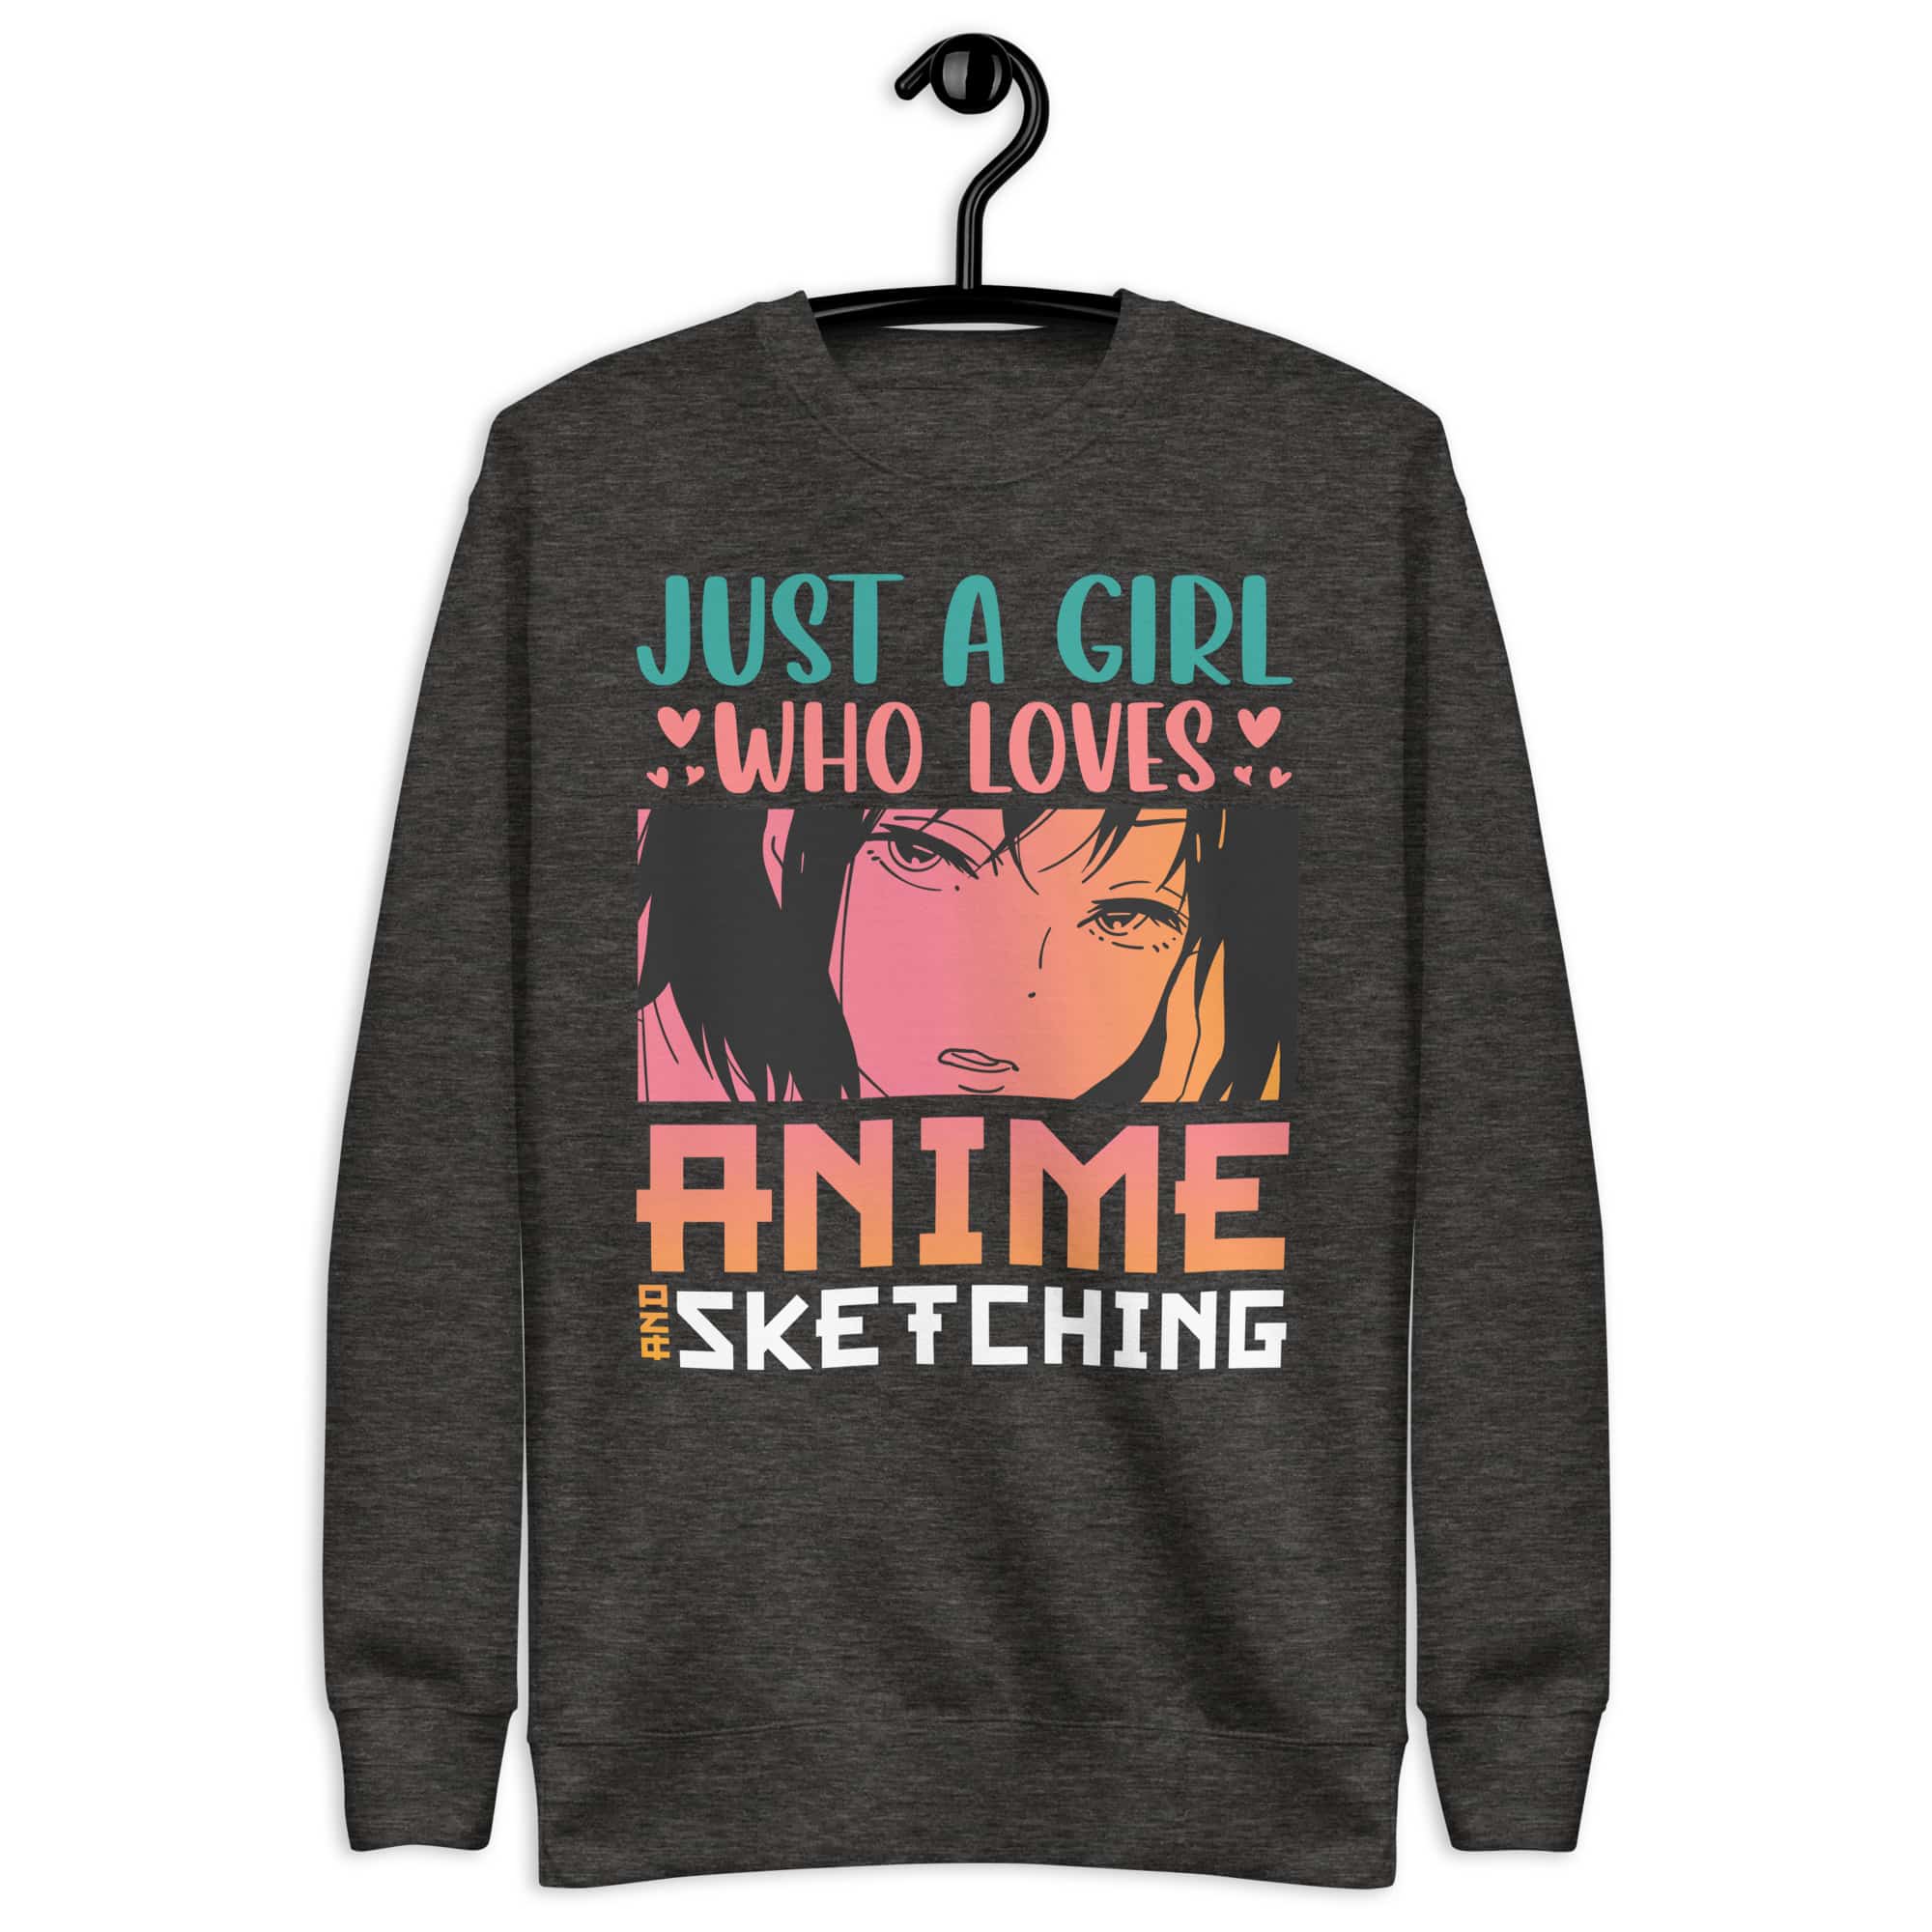 Just a Girl Who Loves Anime Sweatshirt Video game store Gaming merchandise Gaming accessories shop Online gaming store Video game shop near me Gaming console store PC gaming store Gaming gear shop Retro gaming shop Board game shop Anime merchandise Anime store online Japanese anime shop Anime figurines Manga shop Anime DVDs Anime accessories Anime apparel Anime collectibles Anime gifts